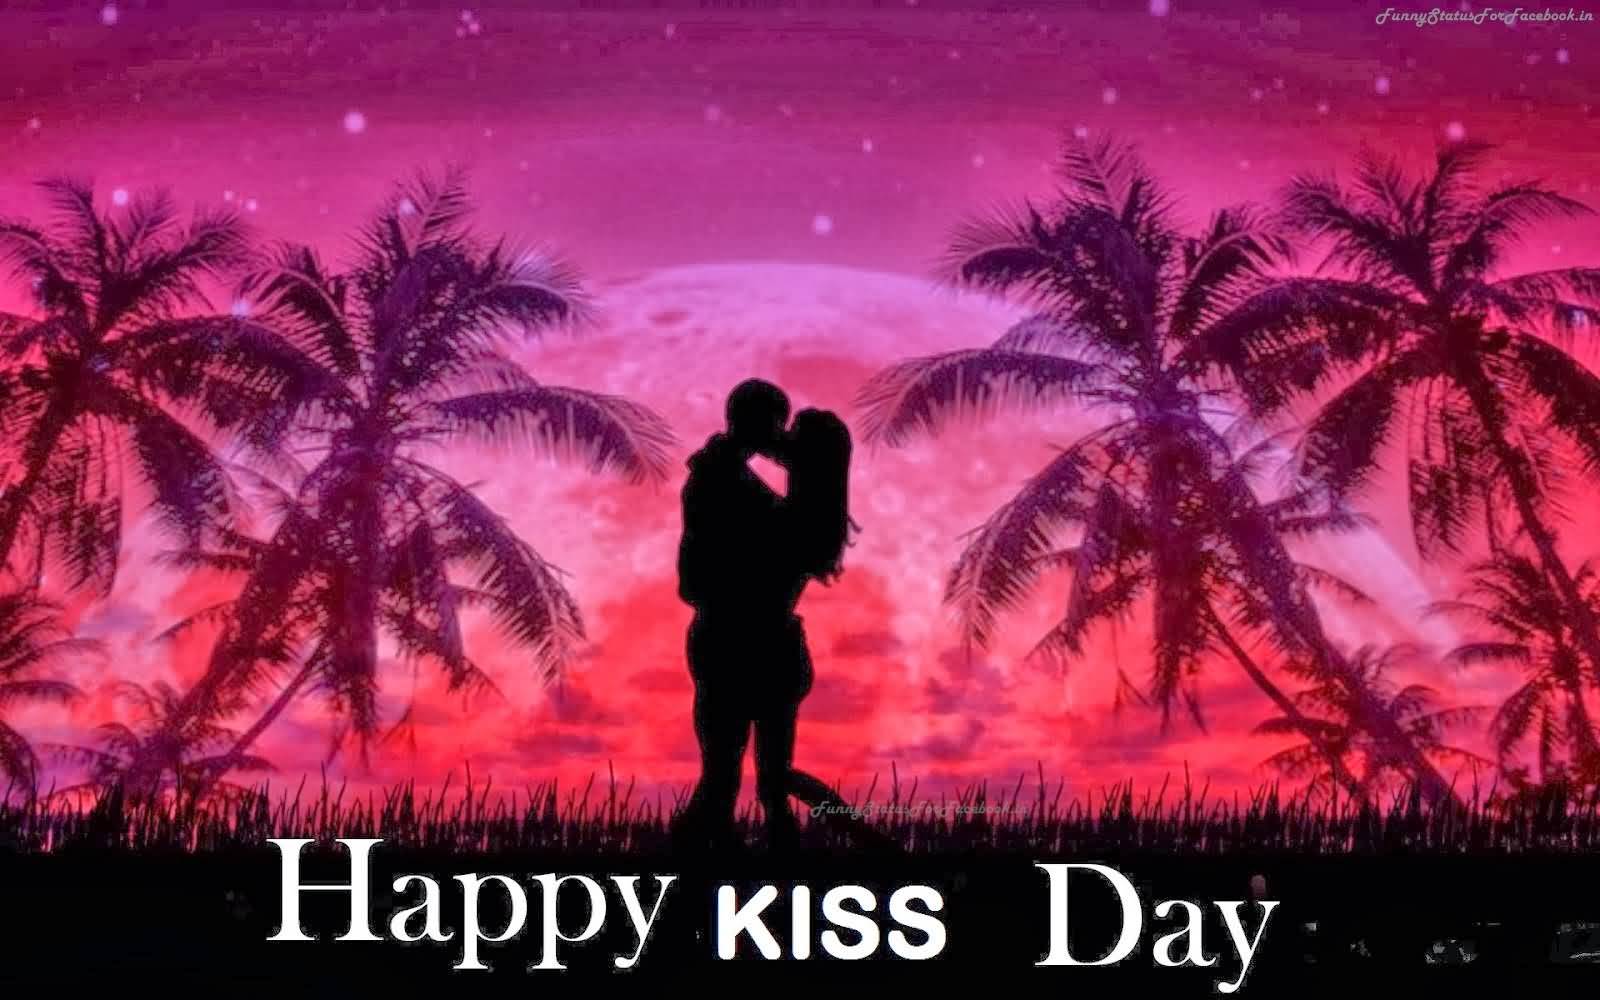 Happy Kiss Day 2017 Kissing Couple Beach View